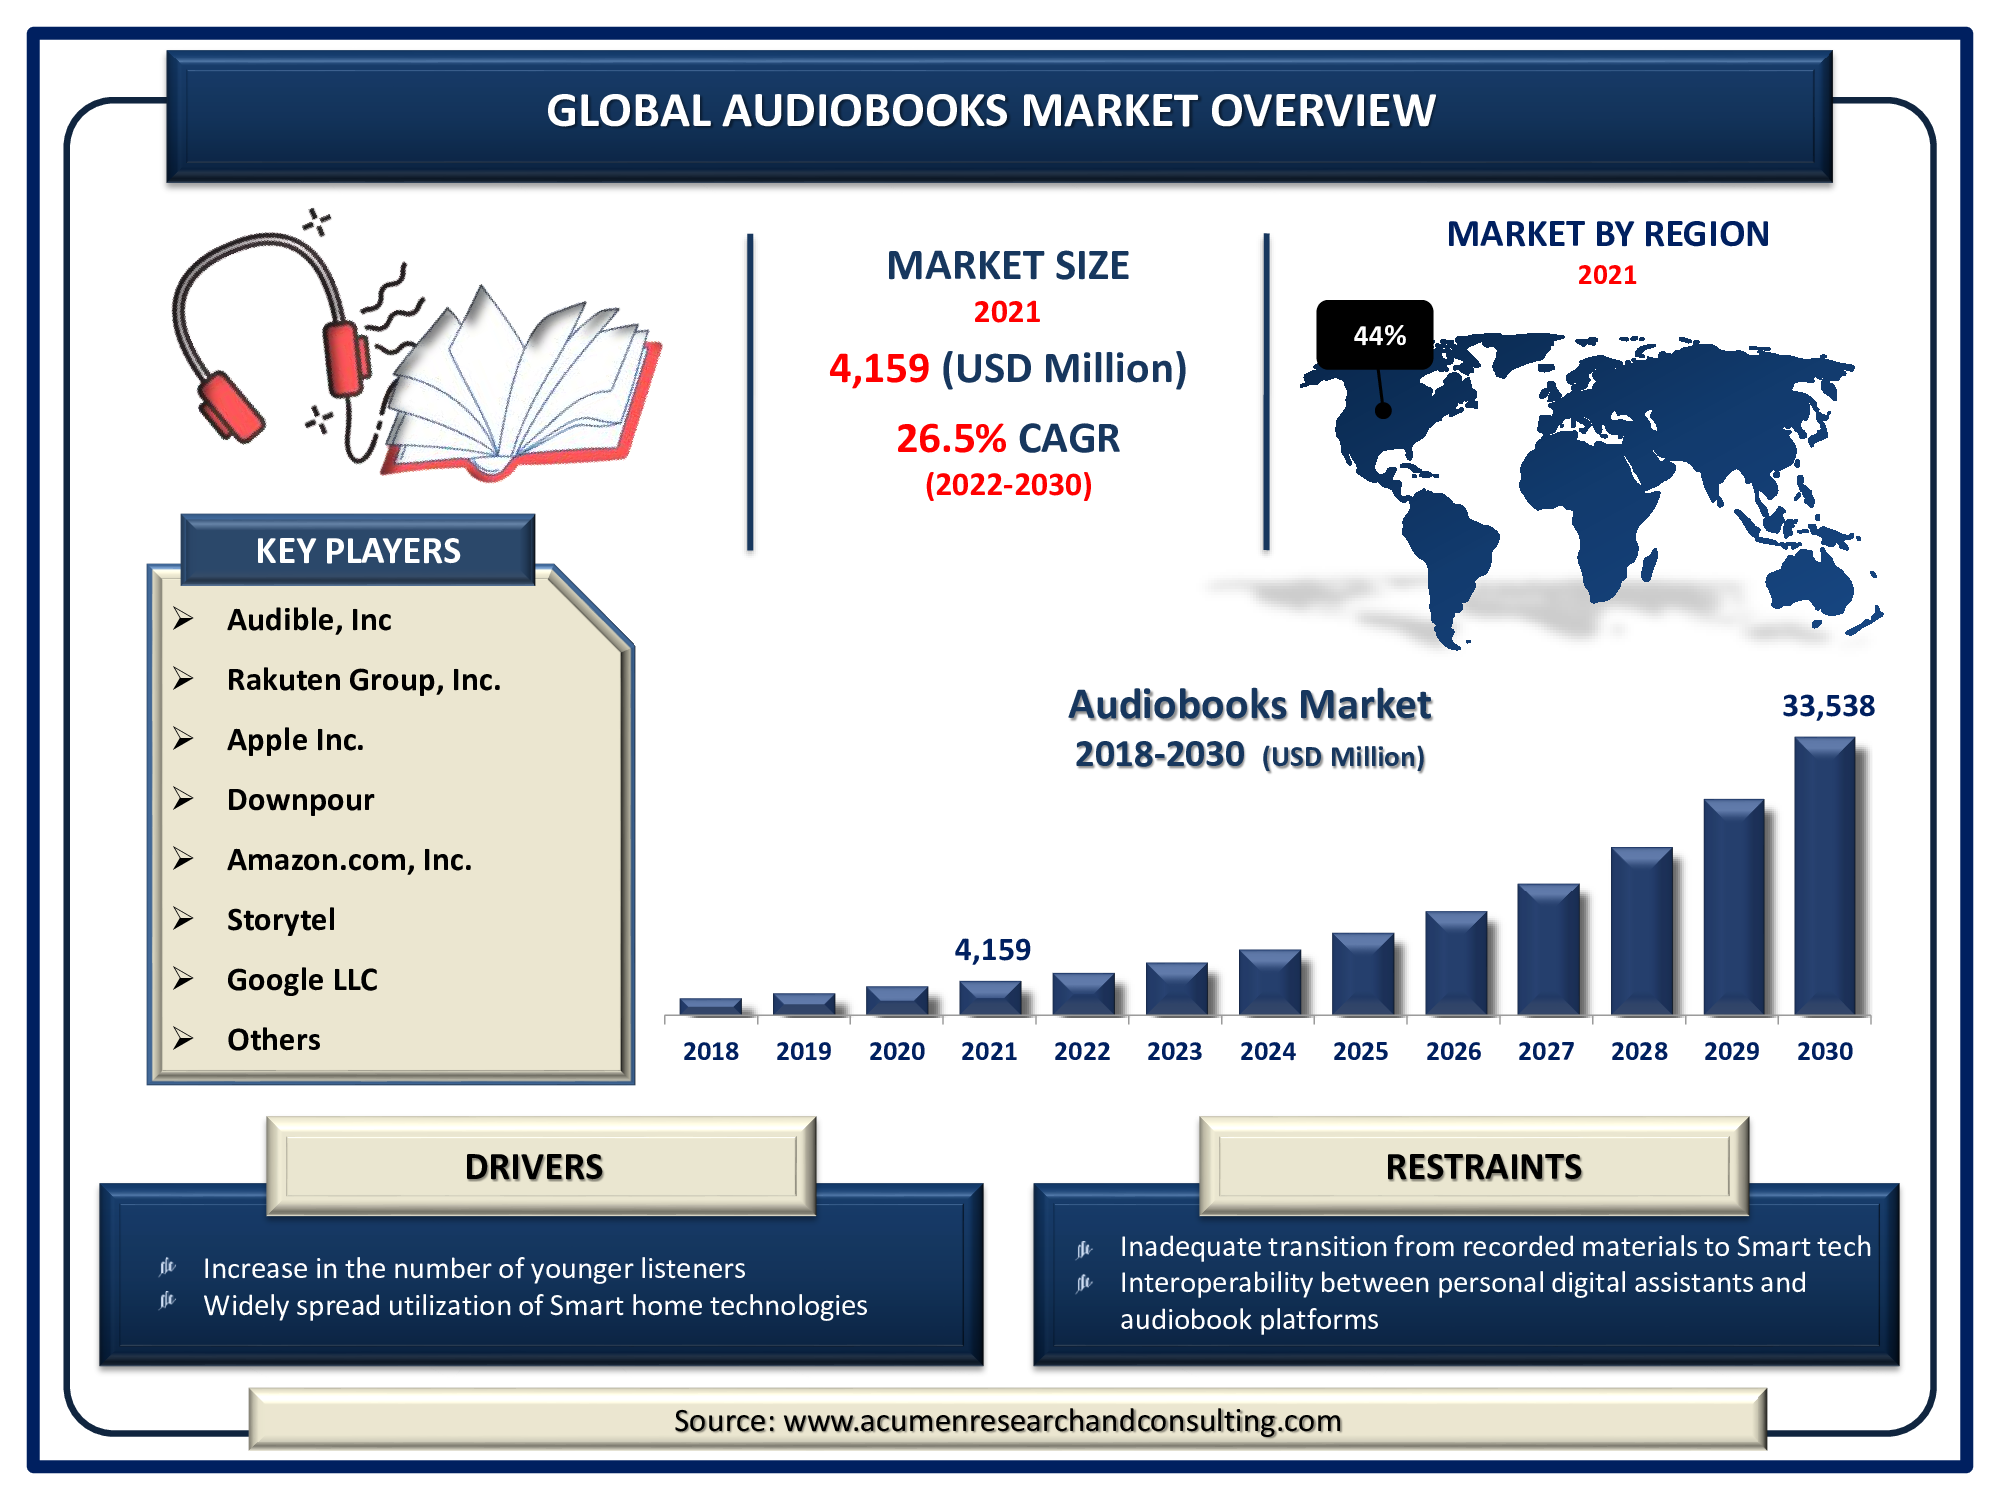 https://www.acumenresearchandconsulting.com/reportimages/Infography_Global-Audiobooks-Market.png